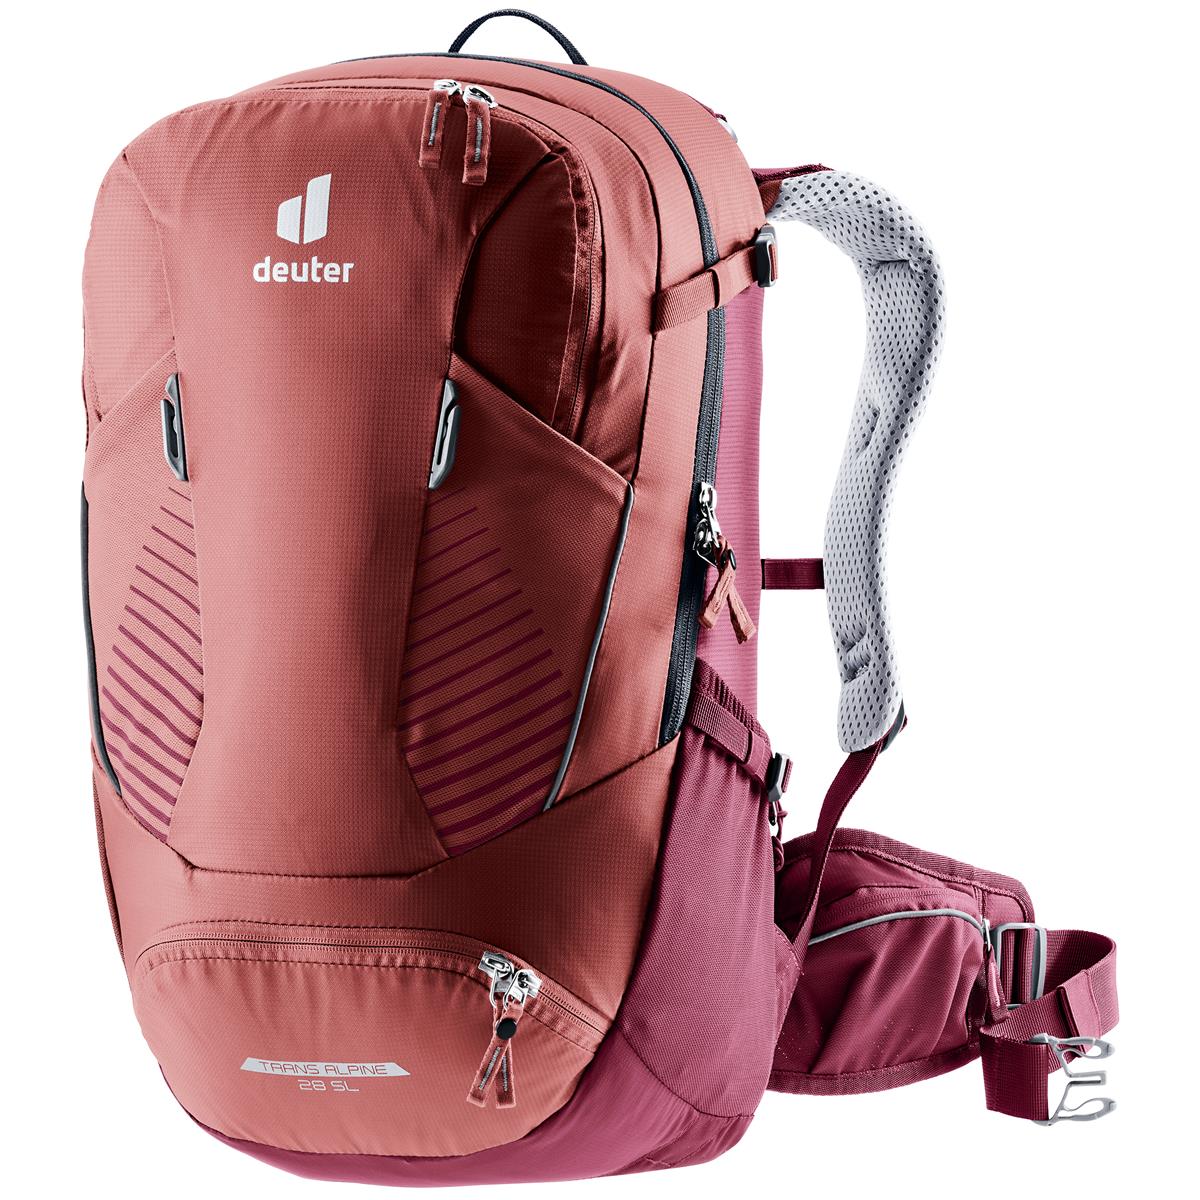 Deuter MTB Backpack with Hydration System Compartment Trans Alpine 28 SL 28L - Caspia Maron